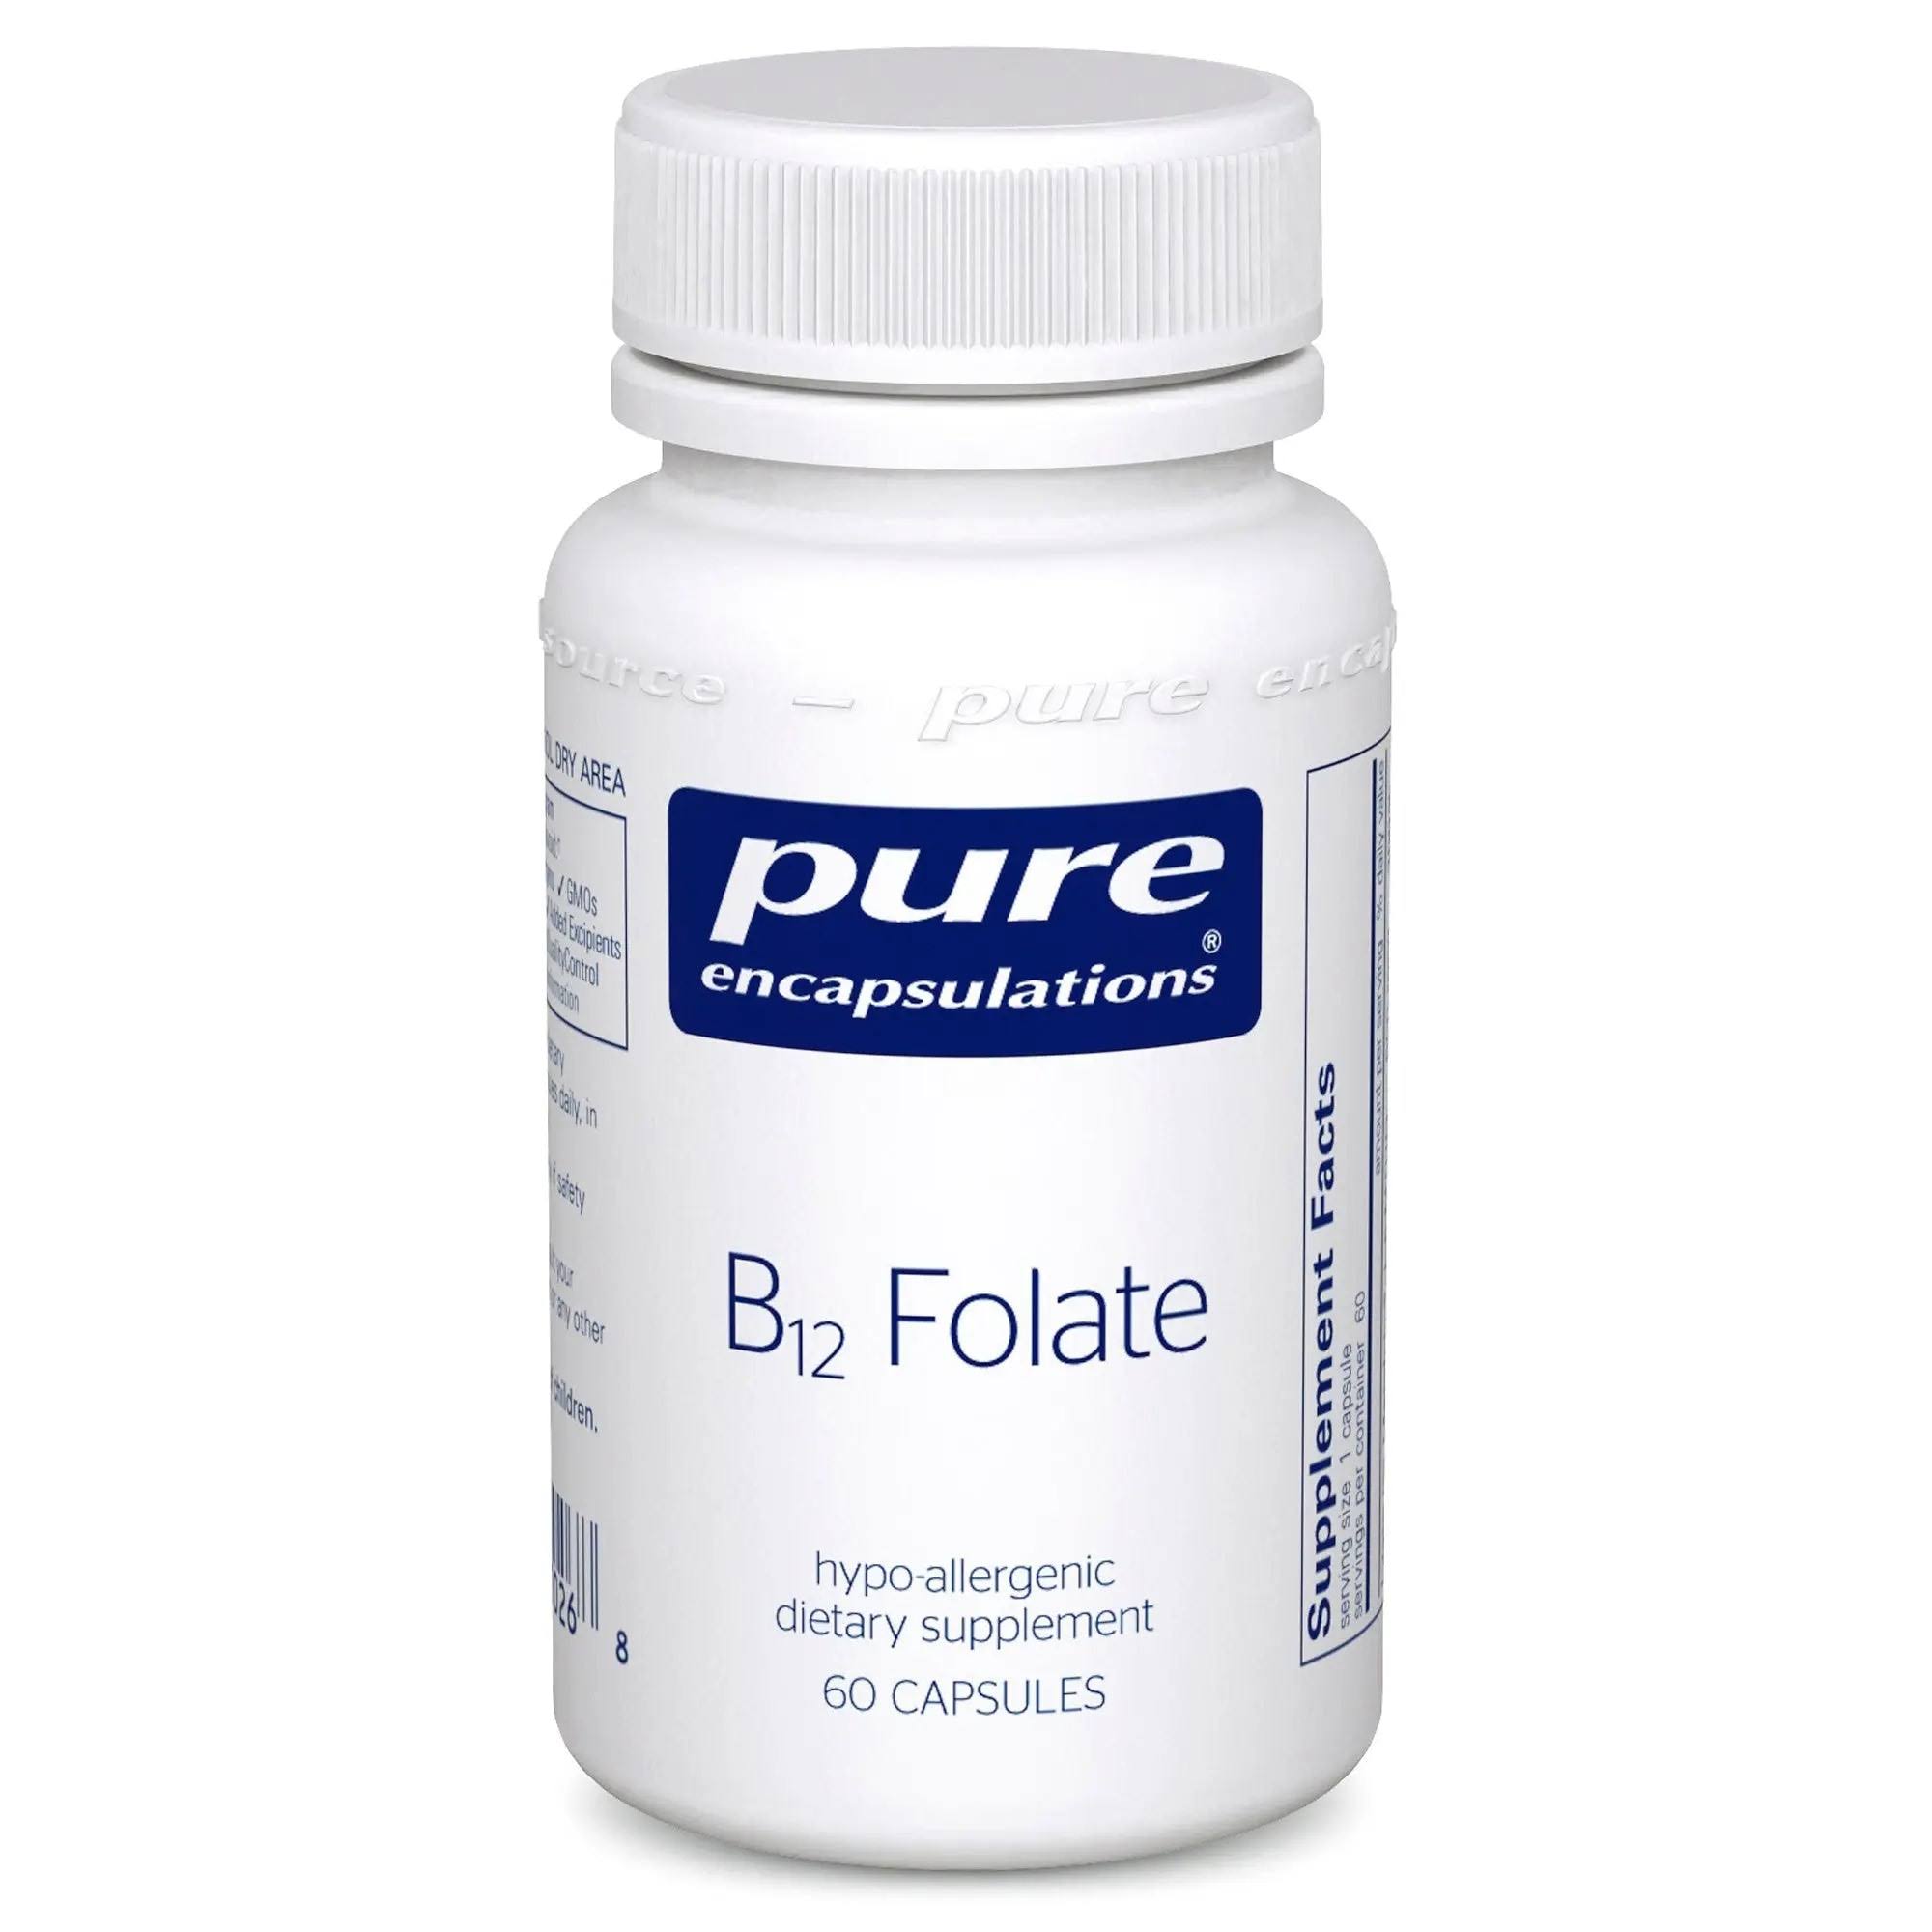 Pure Encapsulations B12 Folate Dietary Supplement - 60ct